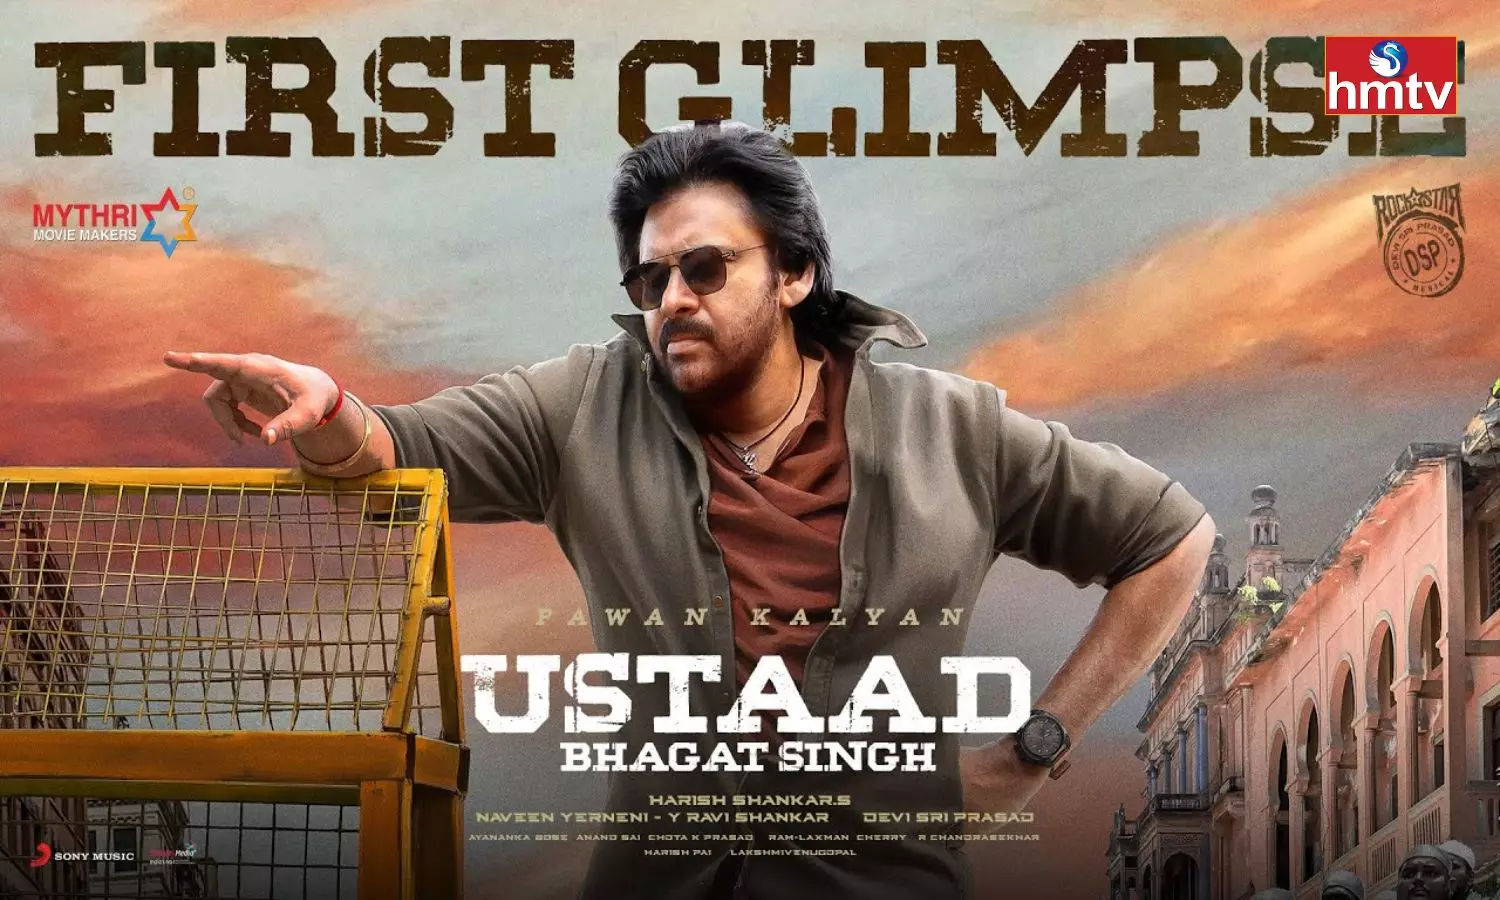 Pawan Kalyan Ustaad Bhagat Singh Massive First Glimpse Launched in Sandhya Theatre